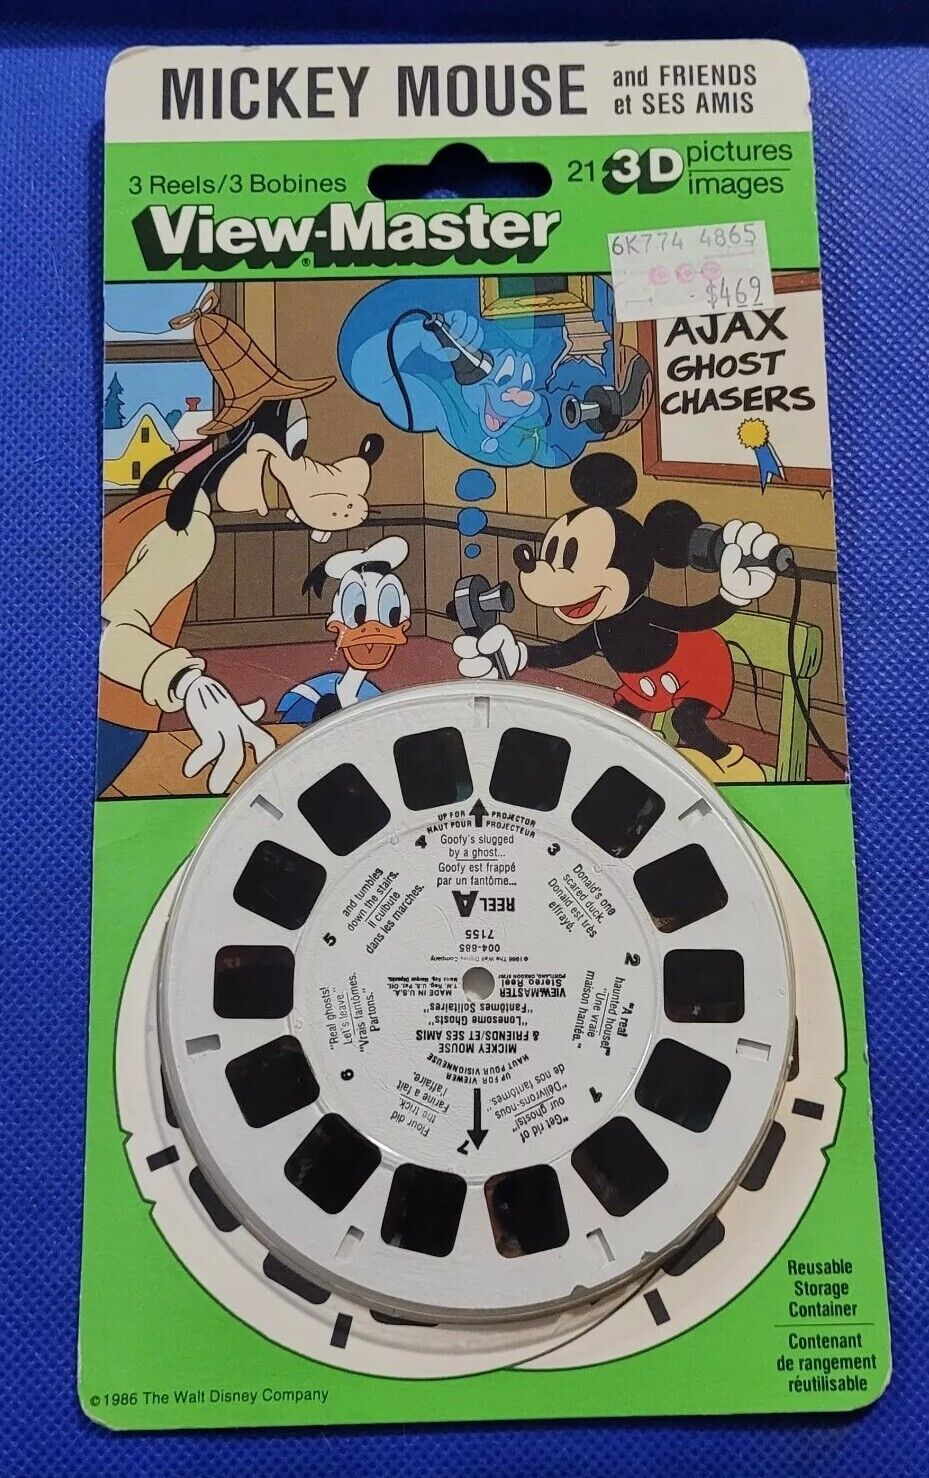 SEALED Disney Disney\'s Mickey Mouse & Friends Cartoons view-master 3 Reels Pack